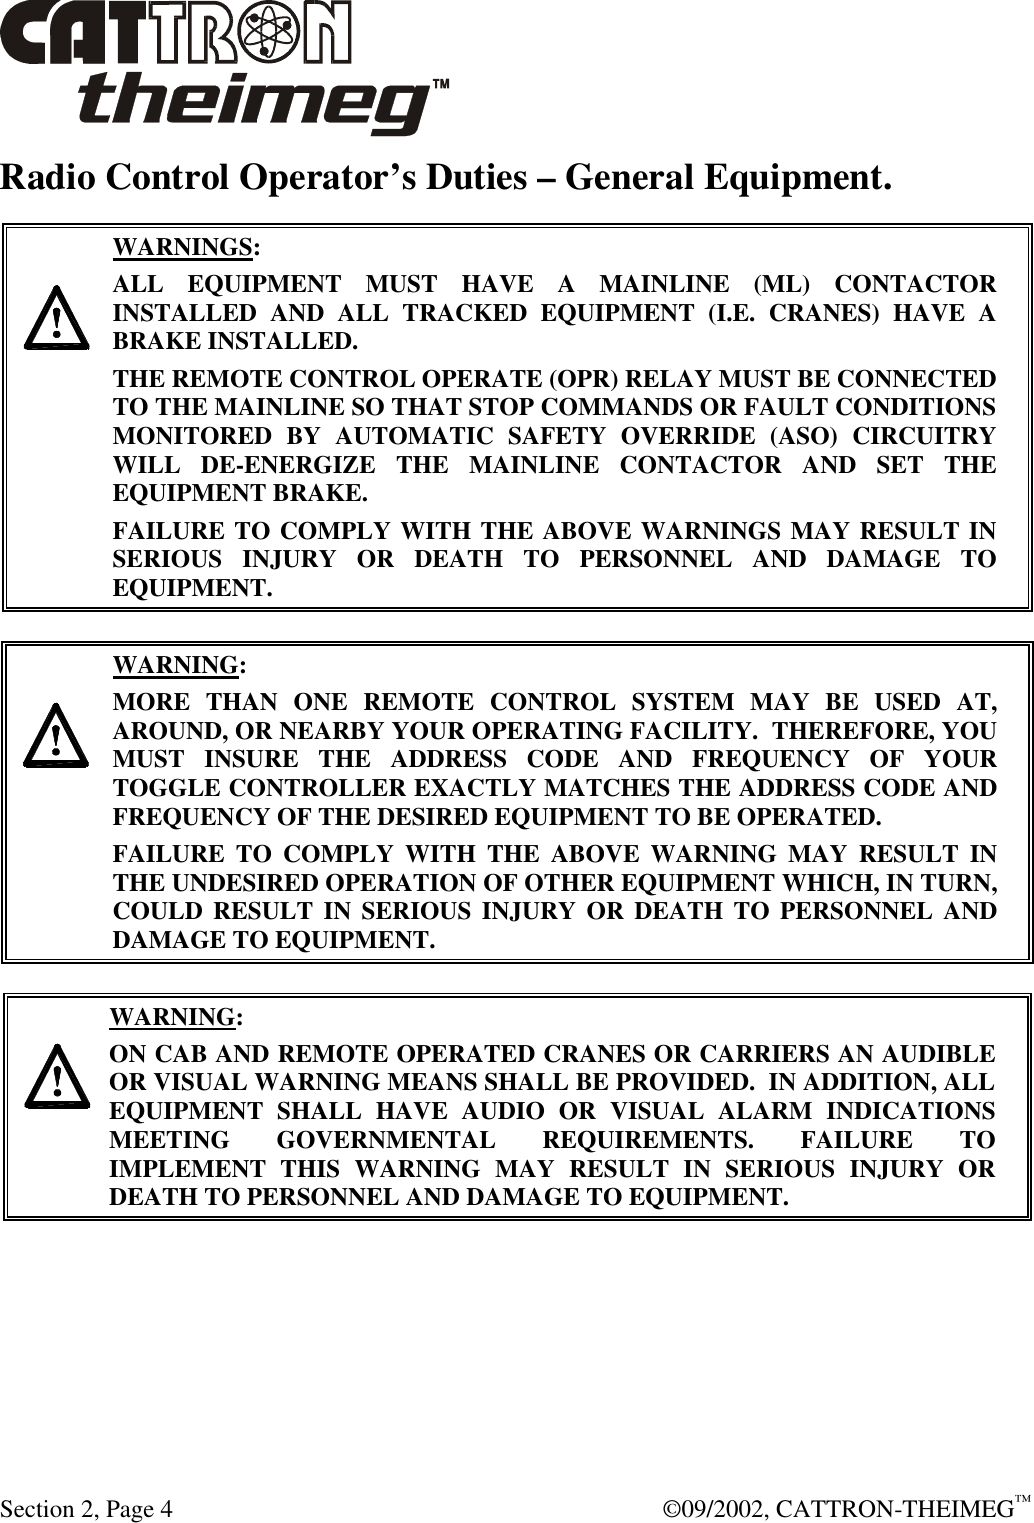  Section 2, Page 4  ©09/2002, CATTRON-THEIMEG™ Radio Control Operator’s Duties – General Equipment.      WARNINGS: ALL EQUIPMENT MUST HAVE A MAINLINE (ML) CONTACTOR INSTALLED AND ALL TRACKED EQUIPMENT (I.E. CRANES) HAVE A BRAKE INSTALLED. THE REMOTE CONTROL OPERATE (OPR) RELAY MUST BE CONNECTED TO THE MAINLINE SO THAT STOP COMMANDS OR FAULT CONDITIONS MONITORED BY AUTOMATIC SAFETY OVERRIDE (ASO) CIRCUITRY WILL DE-ENERGIZE THE MAINLINE CONTACTOR AND SET THE EQUIPMENT BRAKE.  FAILURE TO COMPLY WITH THE ABOVE WARNINGS MAY RESULT IN SERIOUS INJURY OR DEATH TO PERSONNEL AND DAMAGE TO EQUIPMENT.       WARNING: MORE THAN ONE REMOTE CONTROL SYSTEM MAY BE USED AT, AROUND, OR NEARBY YOUR OPERATING FACILITY.  THEREFORE, YOU MUST INSURE THE ADDRESS CODE AND FREQUENCY OF YOUR TOGGLE CONTROLLER EXACTLY MATCHES THE ADDRESS CODE AND FREQUENCY OF THE DESIRED EQUIPMENT TO BE OPERATED. FAILURE TO COMPLY WITH THE ABOVE WARNING MAY RESULT IN THE UNDESIRED OPERATION OF OTHER EQUIPMENT WHICH, IN TURN, COULD RESULT IN SERIOUS INJURY OR DEATH TO PERSONNEL AND DAMAGE TO EQUIPMENT.      WARNING: ON CAB AND REMOTE OPERATED CRANES OR CARRIERS AN AUDIBLE OR VISUAL WARNING MEANS SHALL BE PROVIDED.  IN ADDITION, ALL EQUIPMENT SHALL HAVE AUDIO OR VISUAL ALARM INDICATIONS MEETING GOVERNMENTAL REQUIREMENTS. FAILURE TO IMPLEMENT THIS WARNING MAY RESULT IN SERIOUS INJURY OR DEATH TO PERSONNEL AND DAMAGE TO EQUIPMENT.  